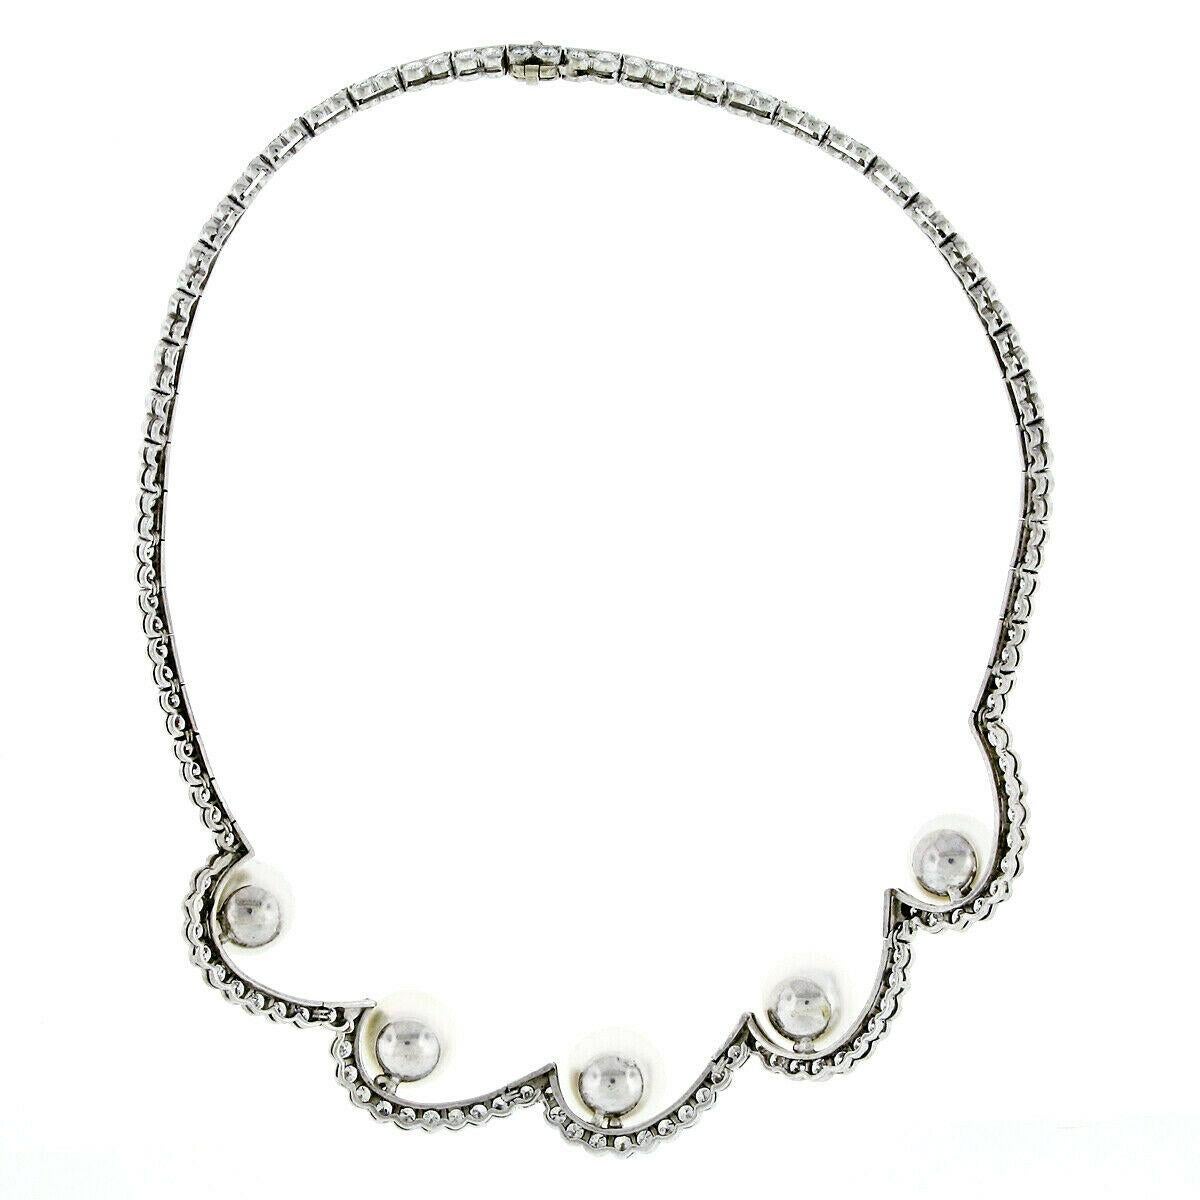 Women's Platinum 10.25 Carat Diamond and Floating South Sea Pearl Statement Necklace For Sale